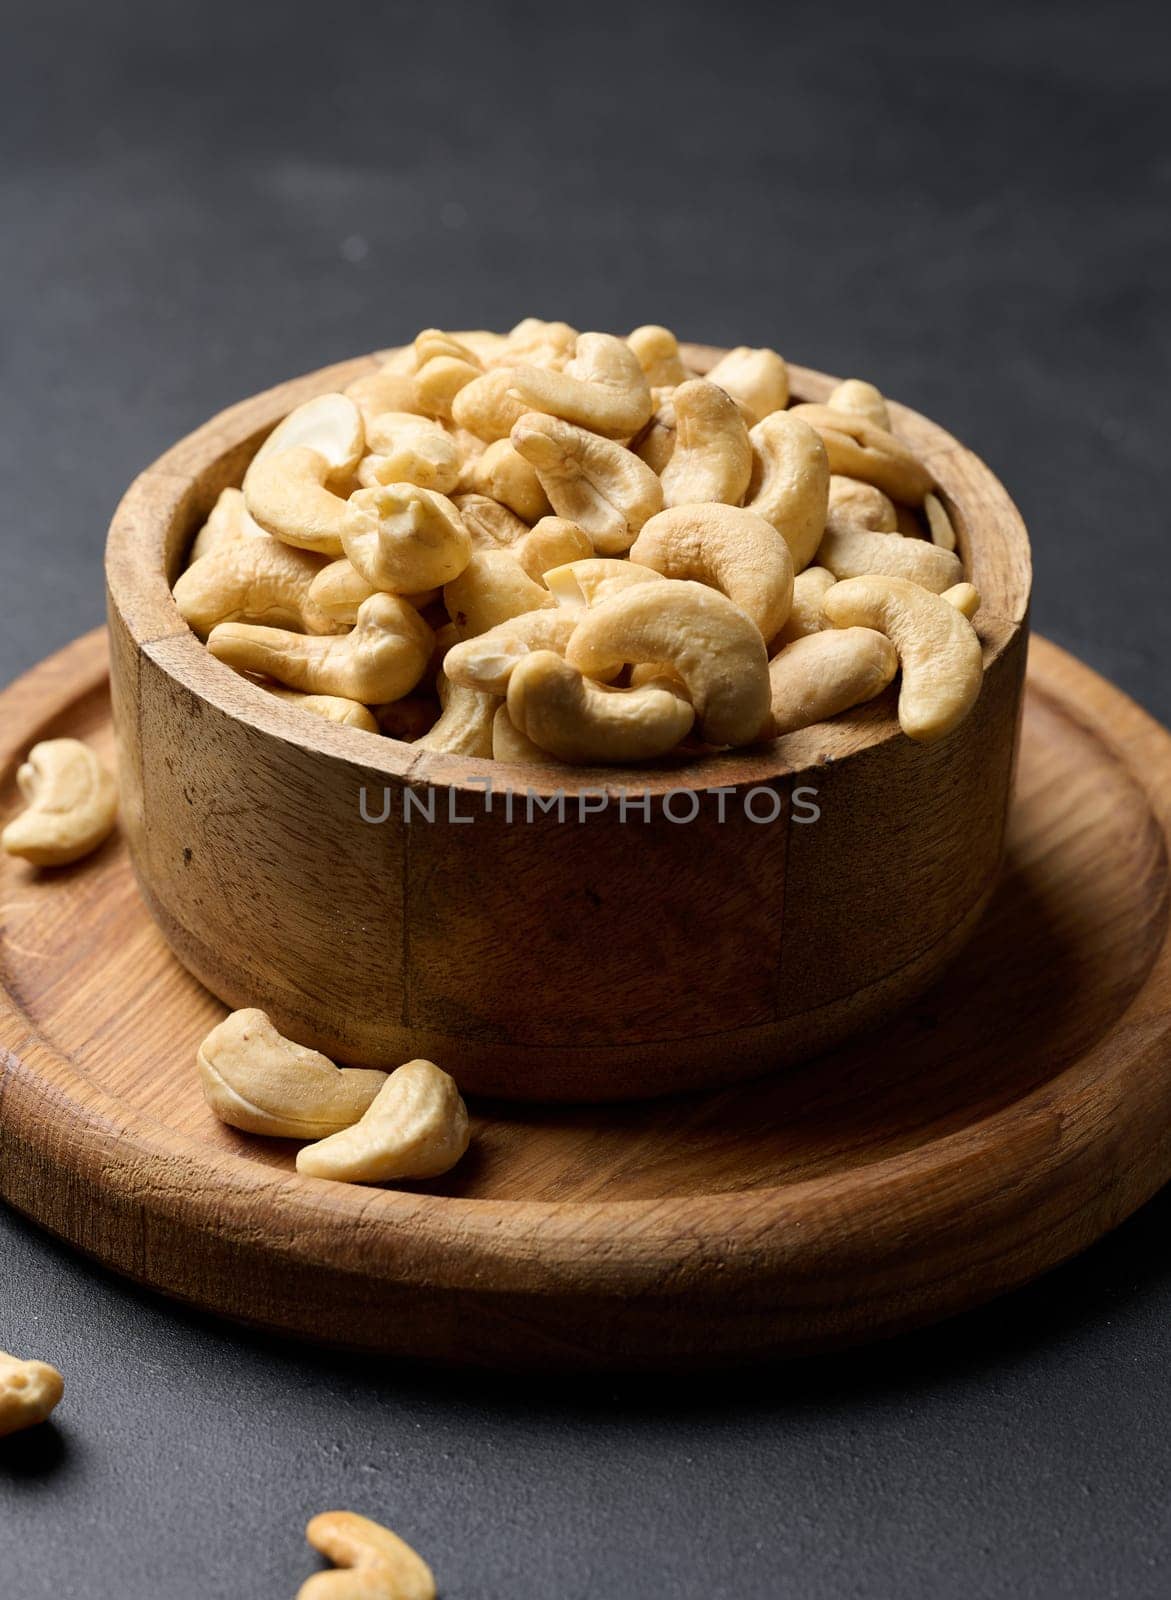 Cashews in a wooden bowl on the table by ndanko